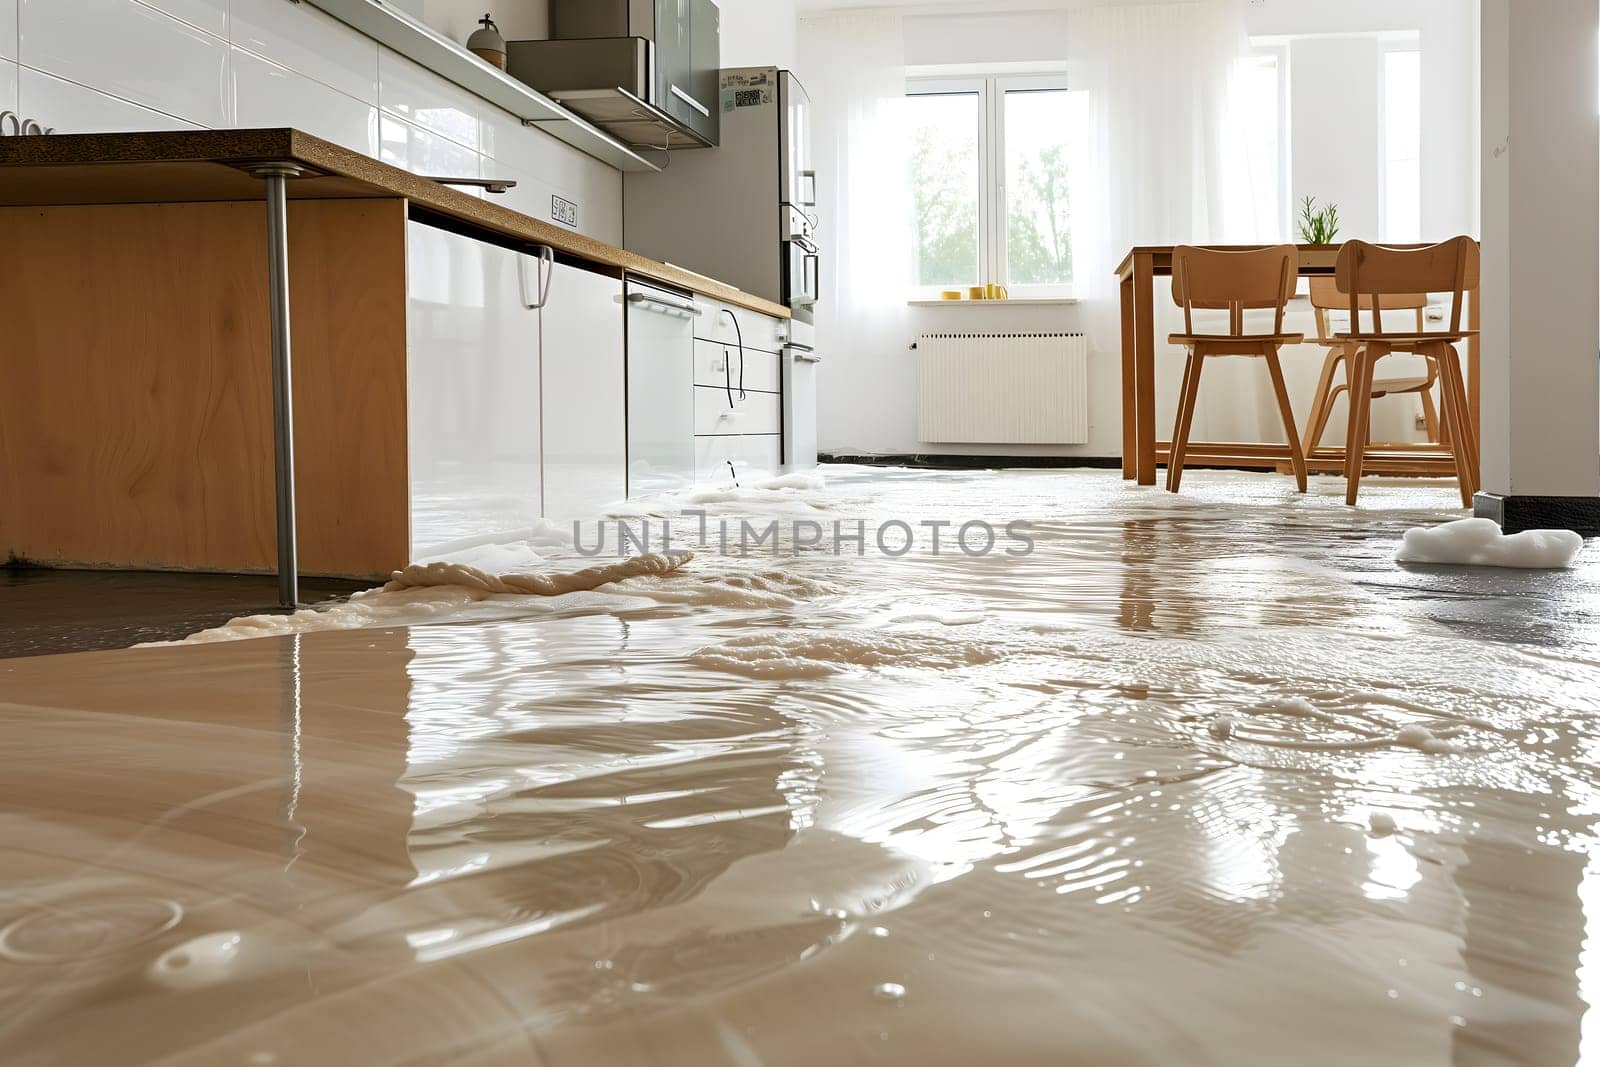 Home Floor Flooded, Showcasing Water Damage And Potential Issues. Neural network generated image. Not based on any actual scene or pattern.